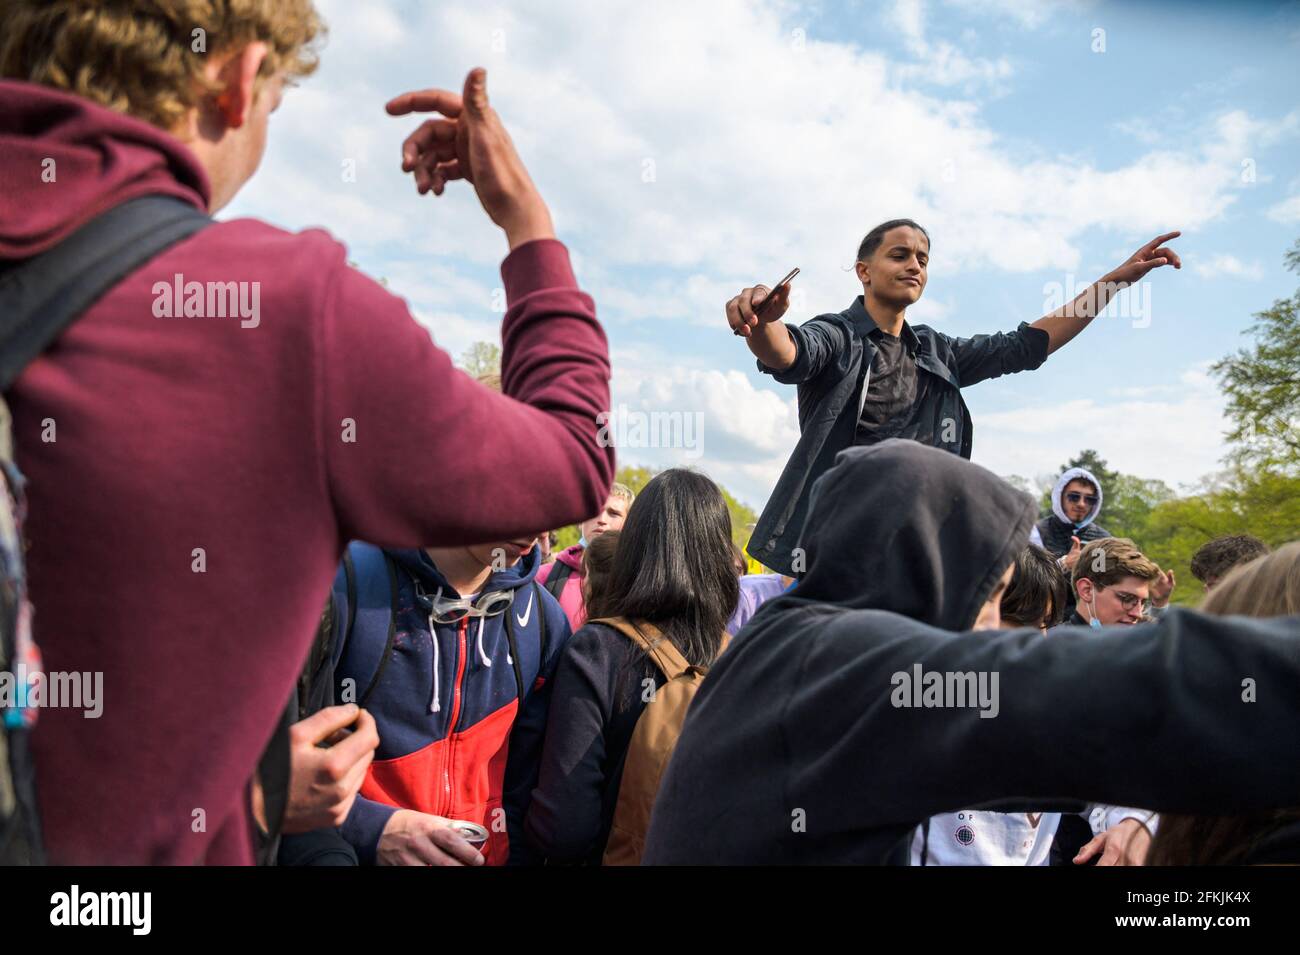 Belgium, Germany, May 1, 2021. People dance during Boum 2 event in Brussels, Belgium on May 1, 2021. The Collectif Abime called for a second edition of La Boum, an illegal gathering to protest against the Covid19 mesures and happening in Le Bois de la Cambre in Brussels. Photo by Julie Sebadelha/ABACAPRESS.COM Stock Photo